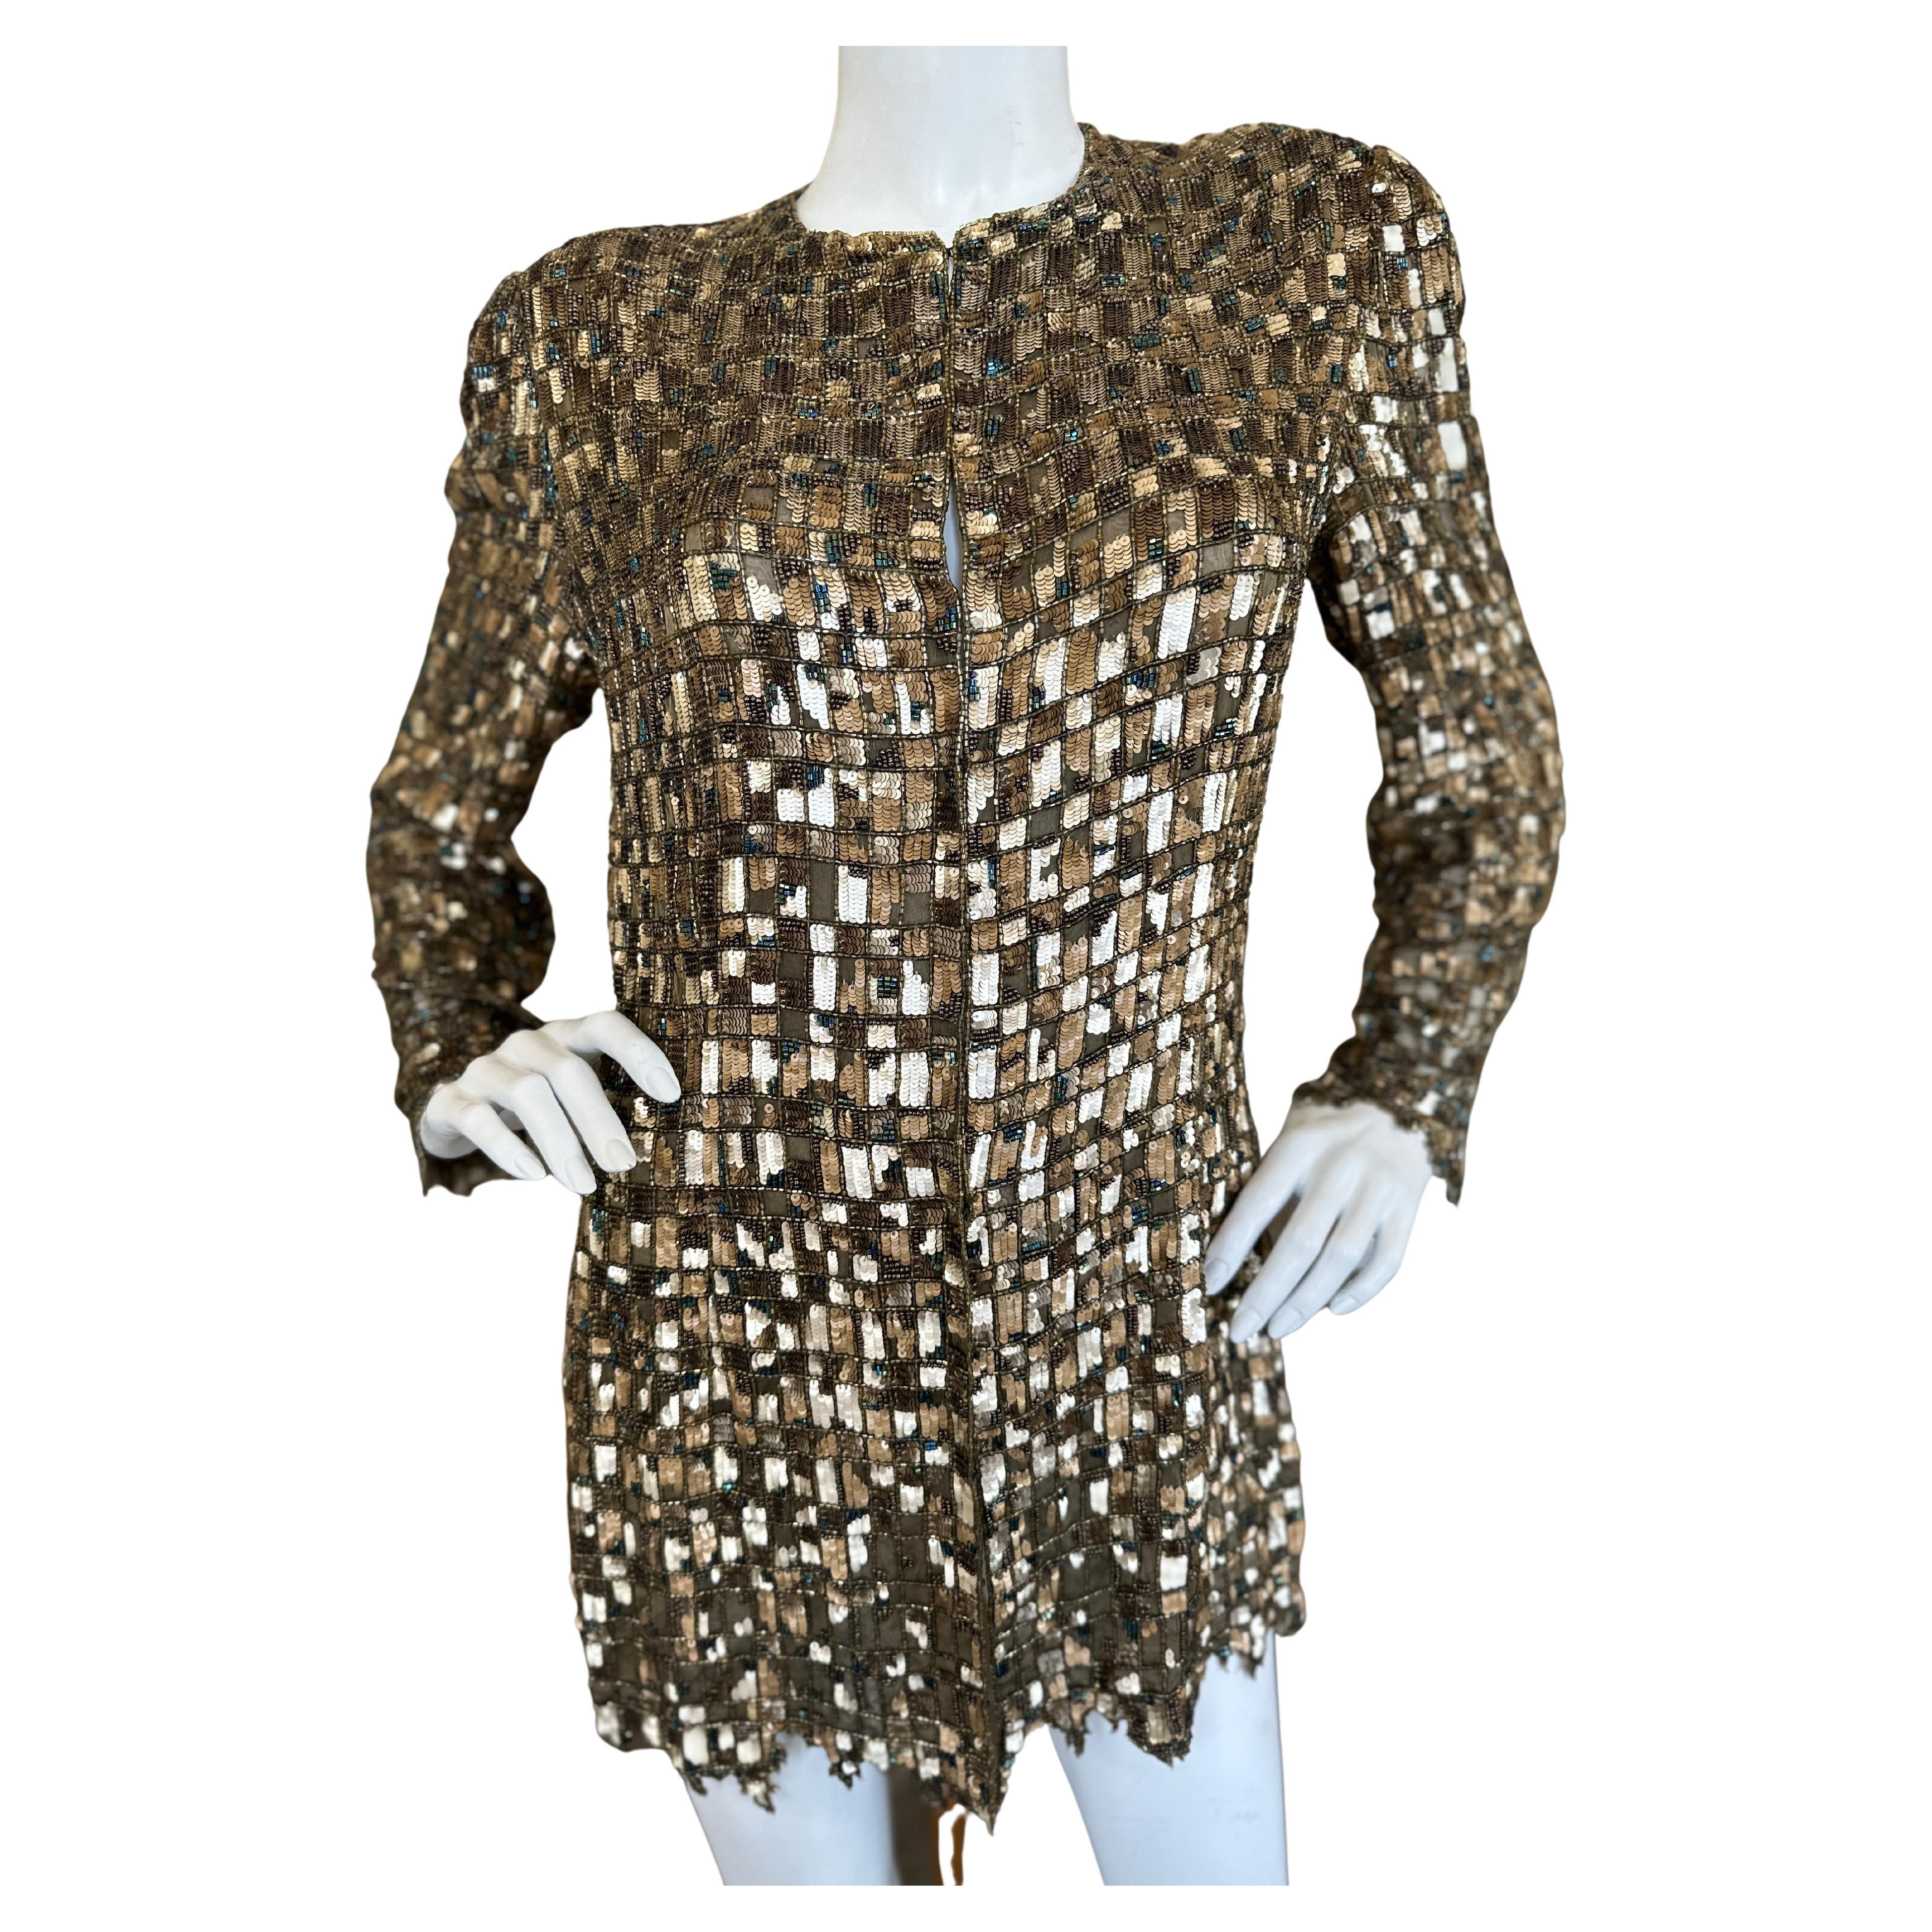 Bill Blass Exquisite Mosaic Beaded Jacket / Mini Dress from 1999 For Sale